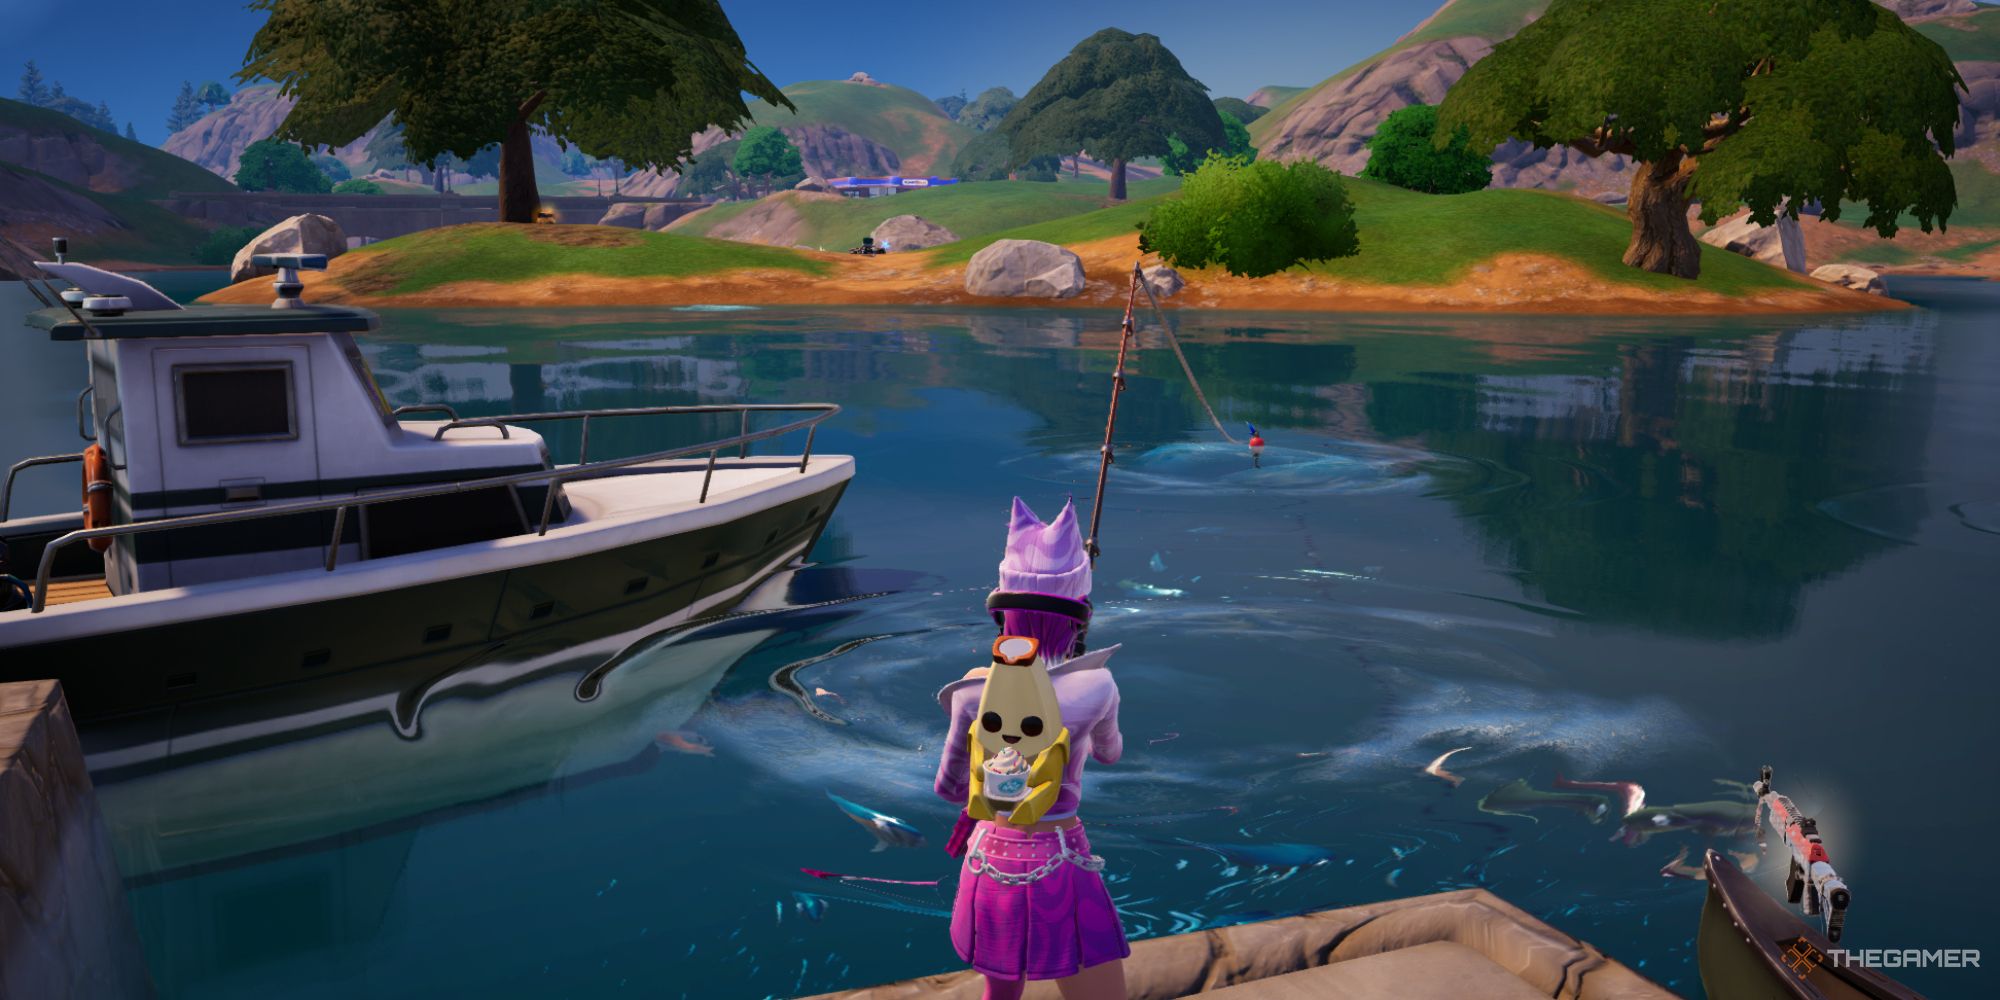 Fortnite avatar fishing during a match. A docked boat can be seen on the left of the image, and land with trees and bushes is viewable in the distance. 